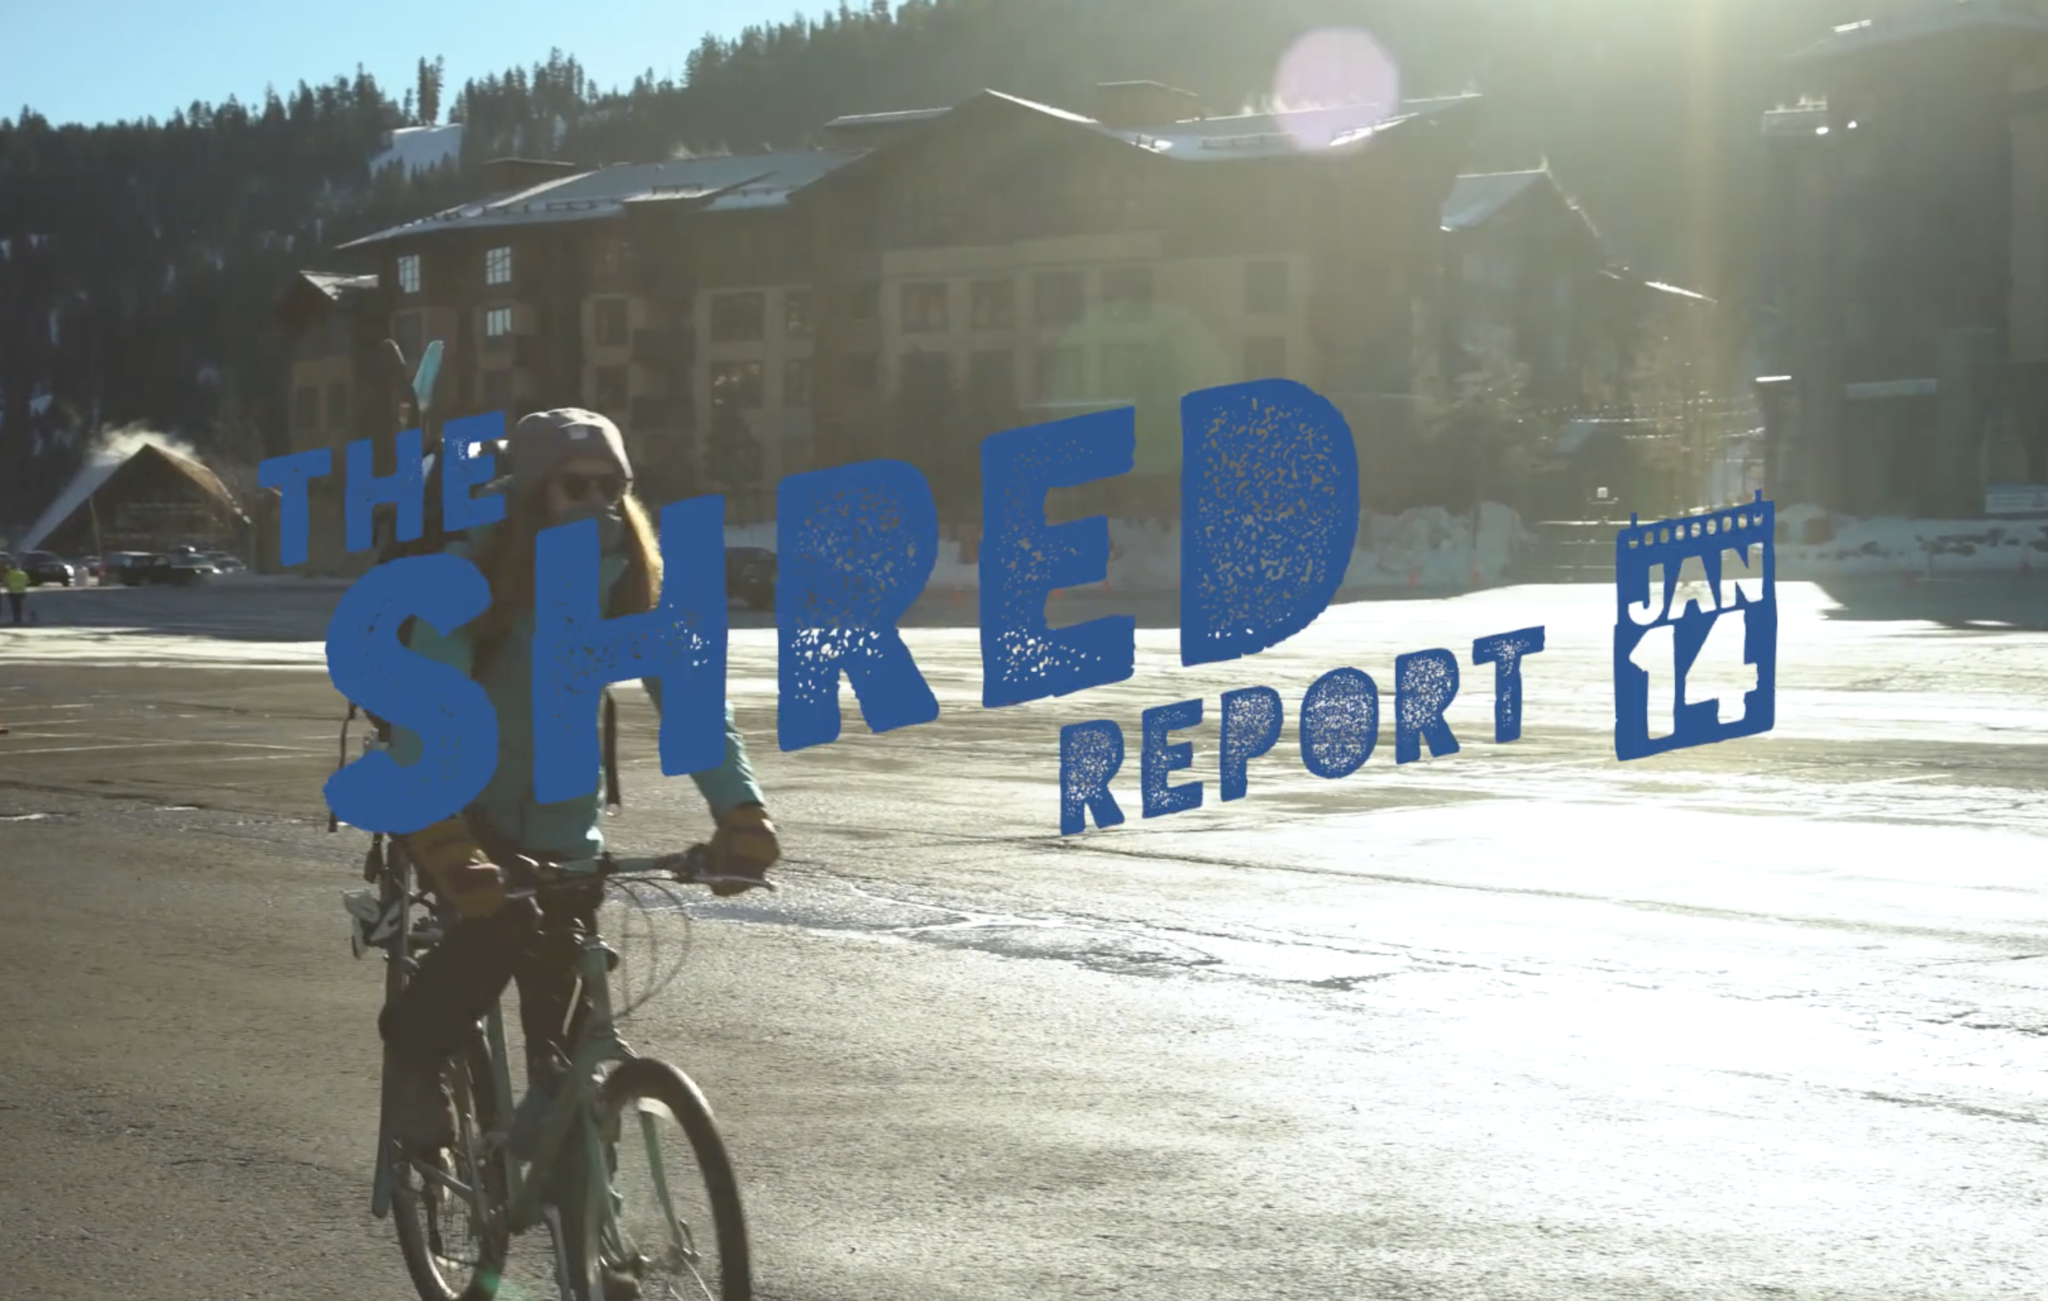 Shred Report January 14